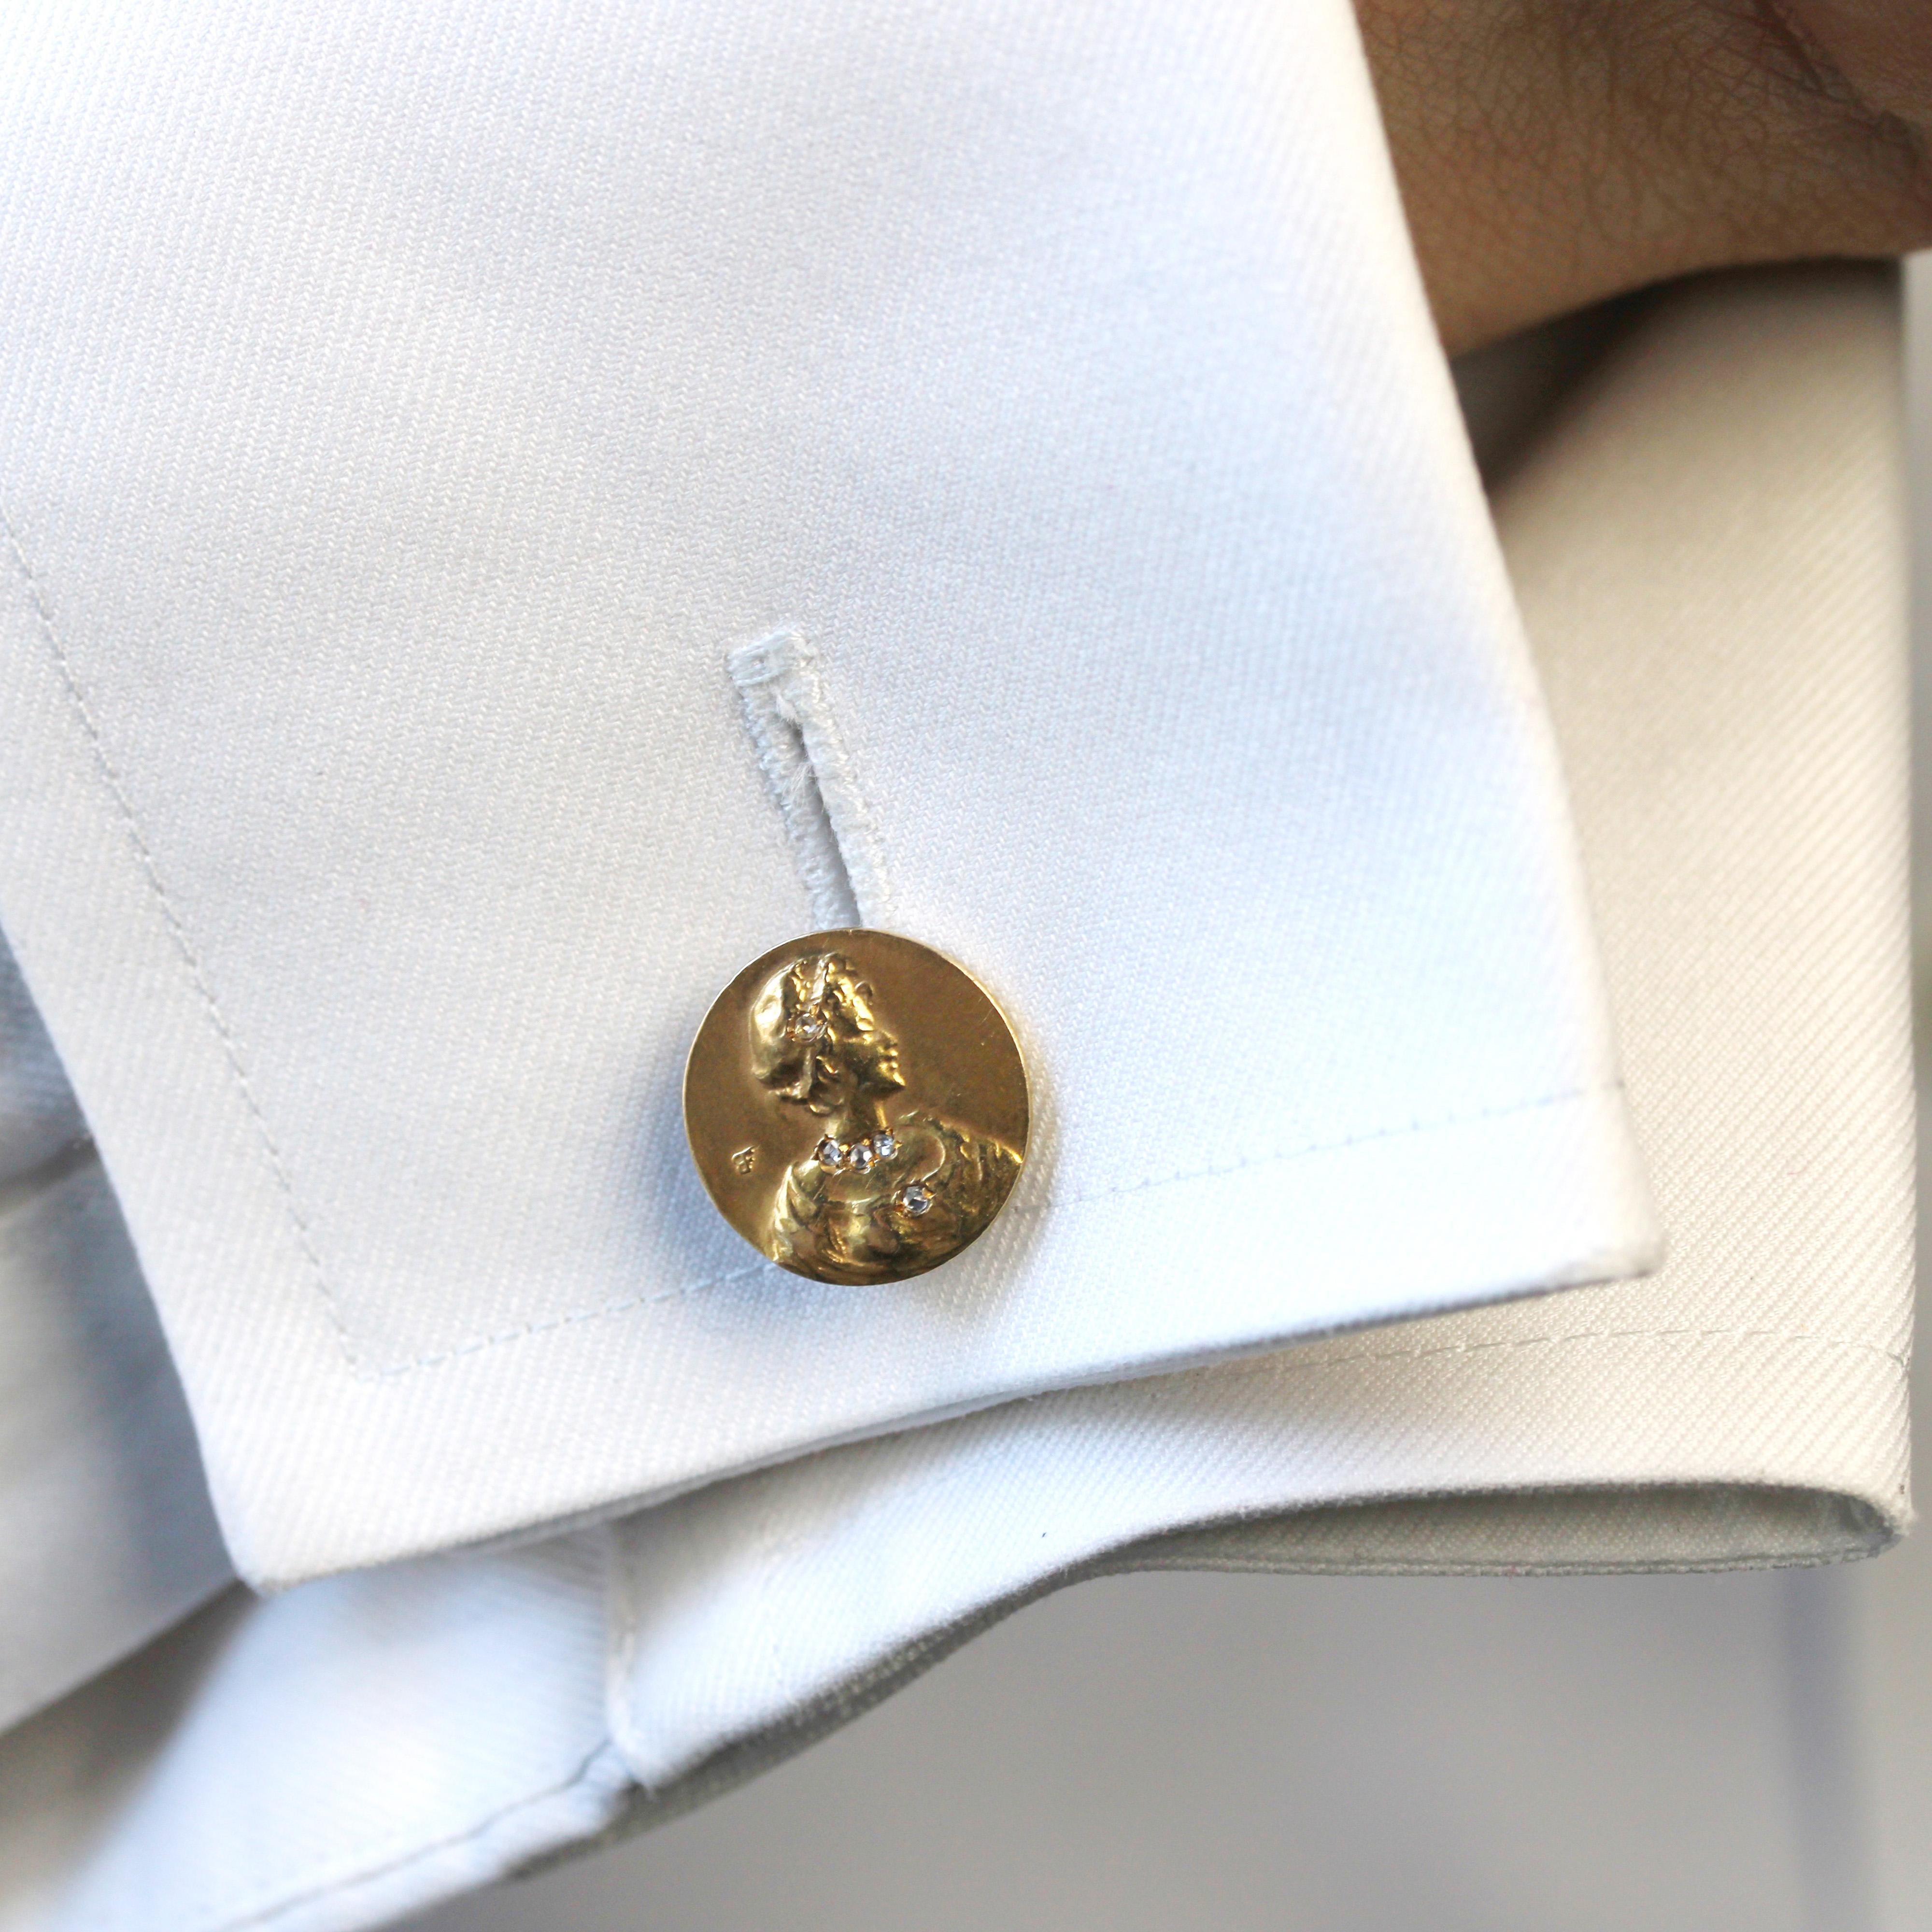 Cufflinks in 18 karat yellow gold.
Round in shape, these antique cufflinks are each adorned with a bust of a woman whose headdress, neck and dress are set with rose-cut diamonds. The fastener is a jaseron chain with bombshells at the end. One of